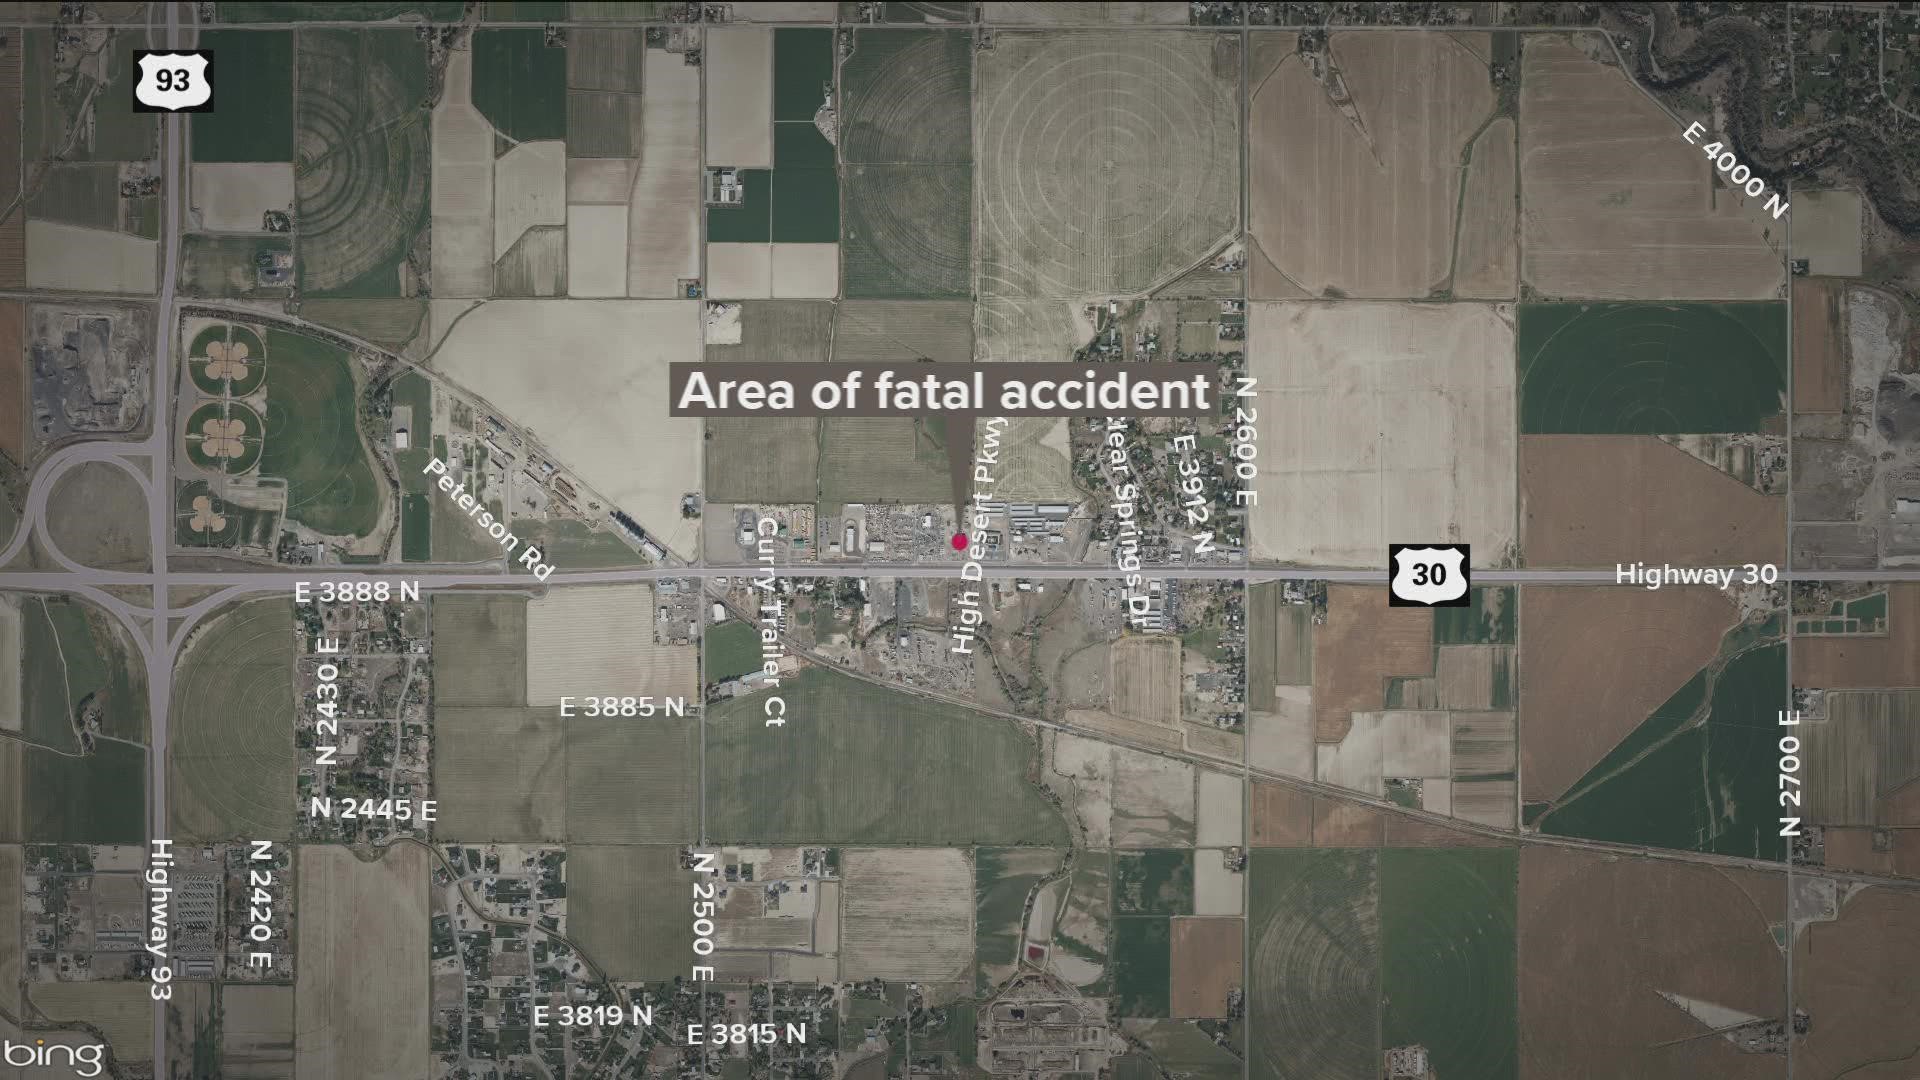 Brett Daley, 31, died after a load of supplies fell on top of him, according to the Twin Falls County Coroner.